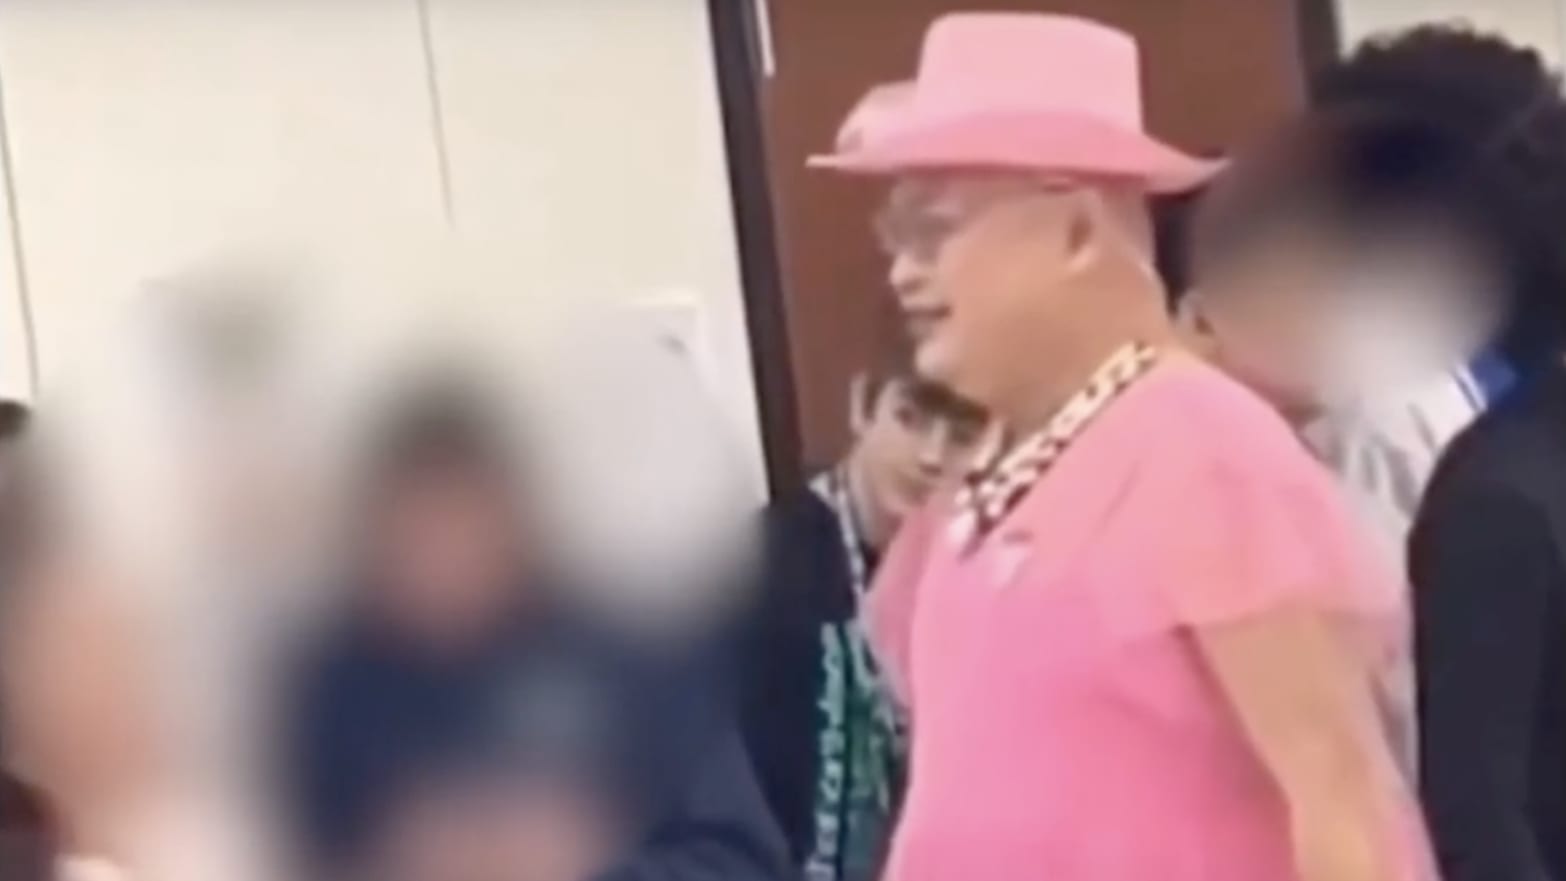 Rachmad Tjachyadi resigned from his job as a science teacher after Libs of TikTok shared a video of him wearing a pink dress for a Texas school’s Spirit Day. 